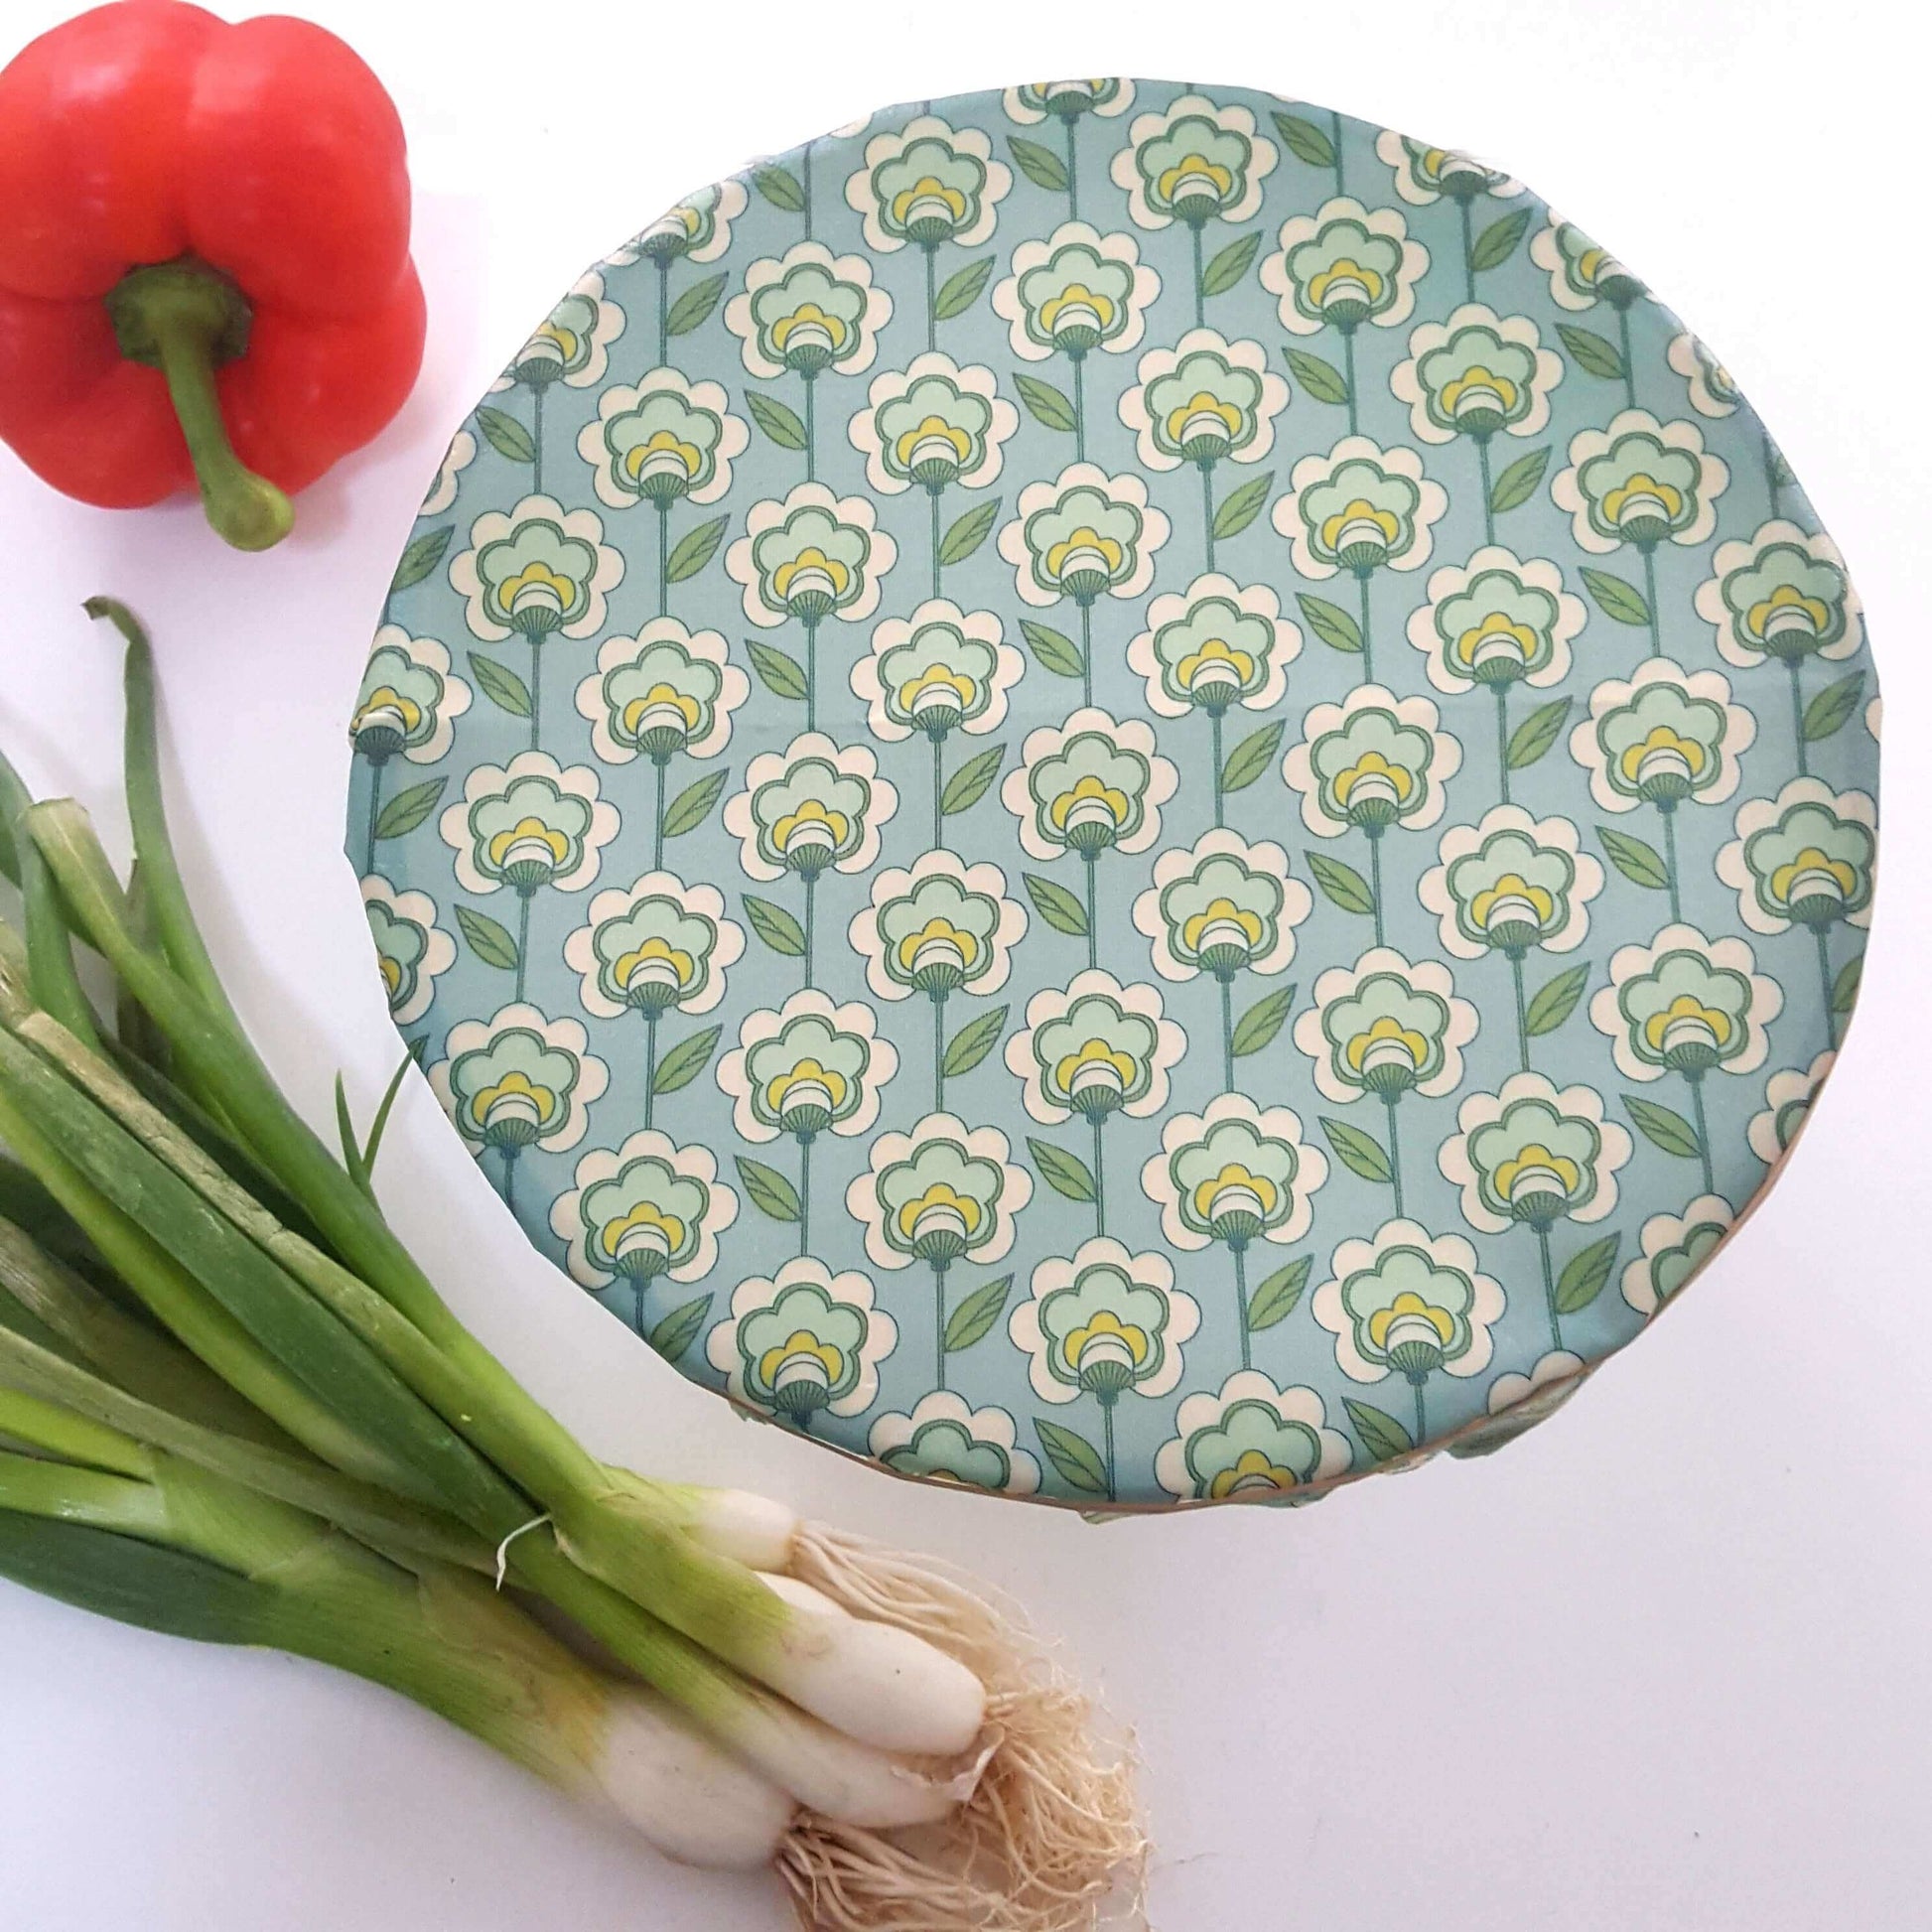 Reusable Beeswax Food Wraps 100% Hand Made in the UK by Honey Bee Good shown in Classic Mod Poppies Bowl